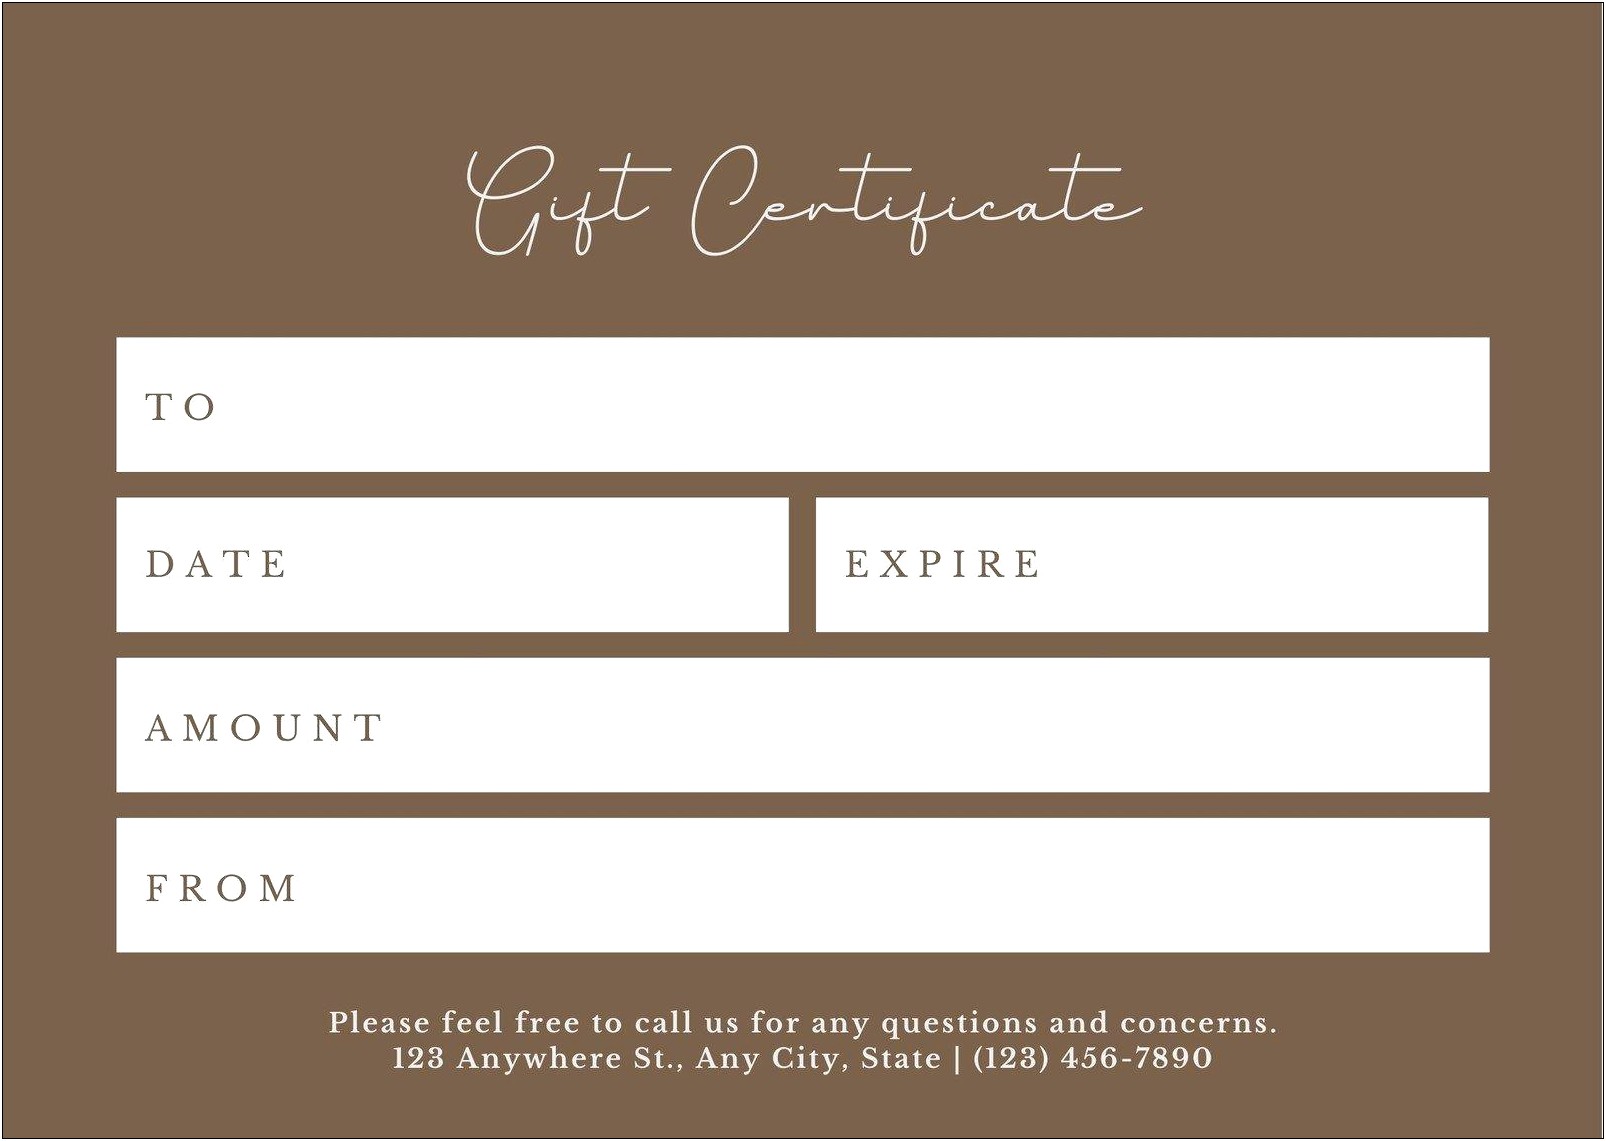 Free Customizable Gift Certificate Template Dogs